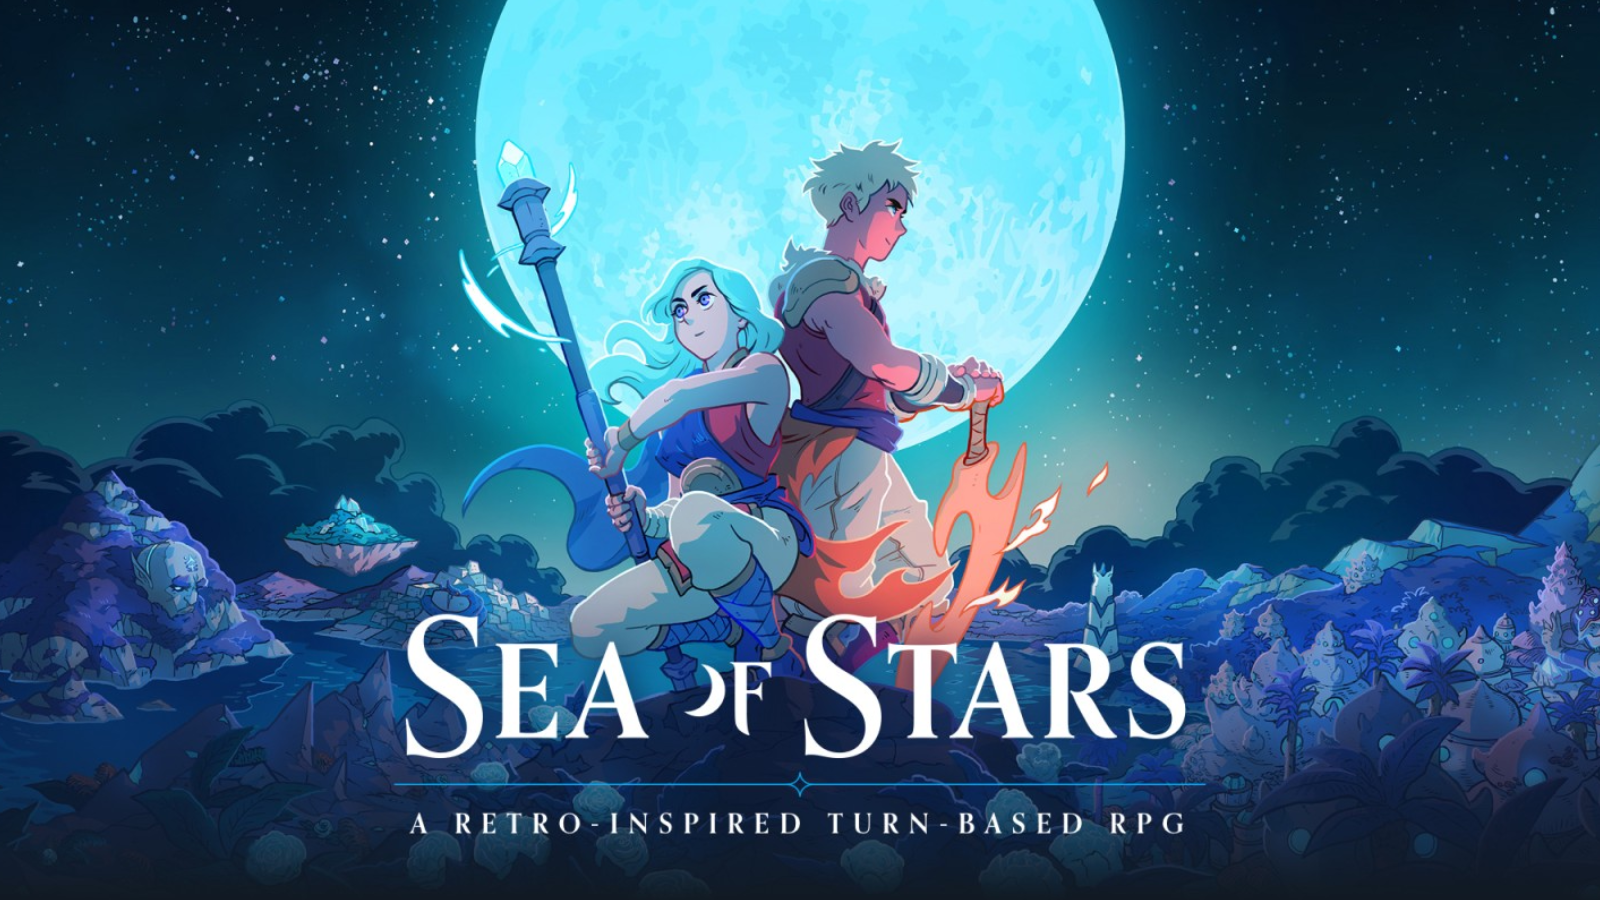 Retro-inspired RPG Sea of Stars delayed to 2023